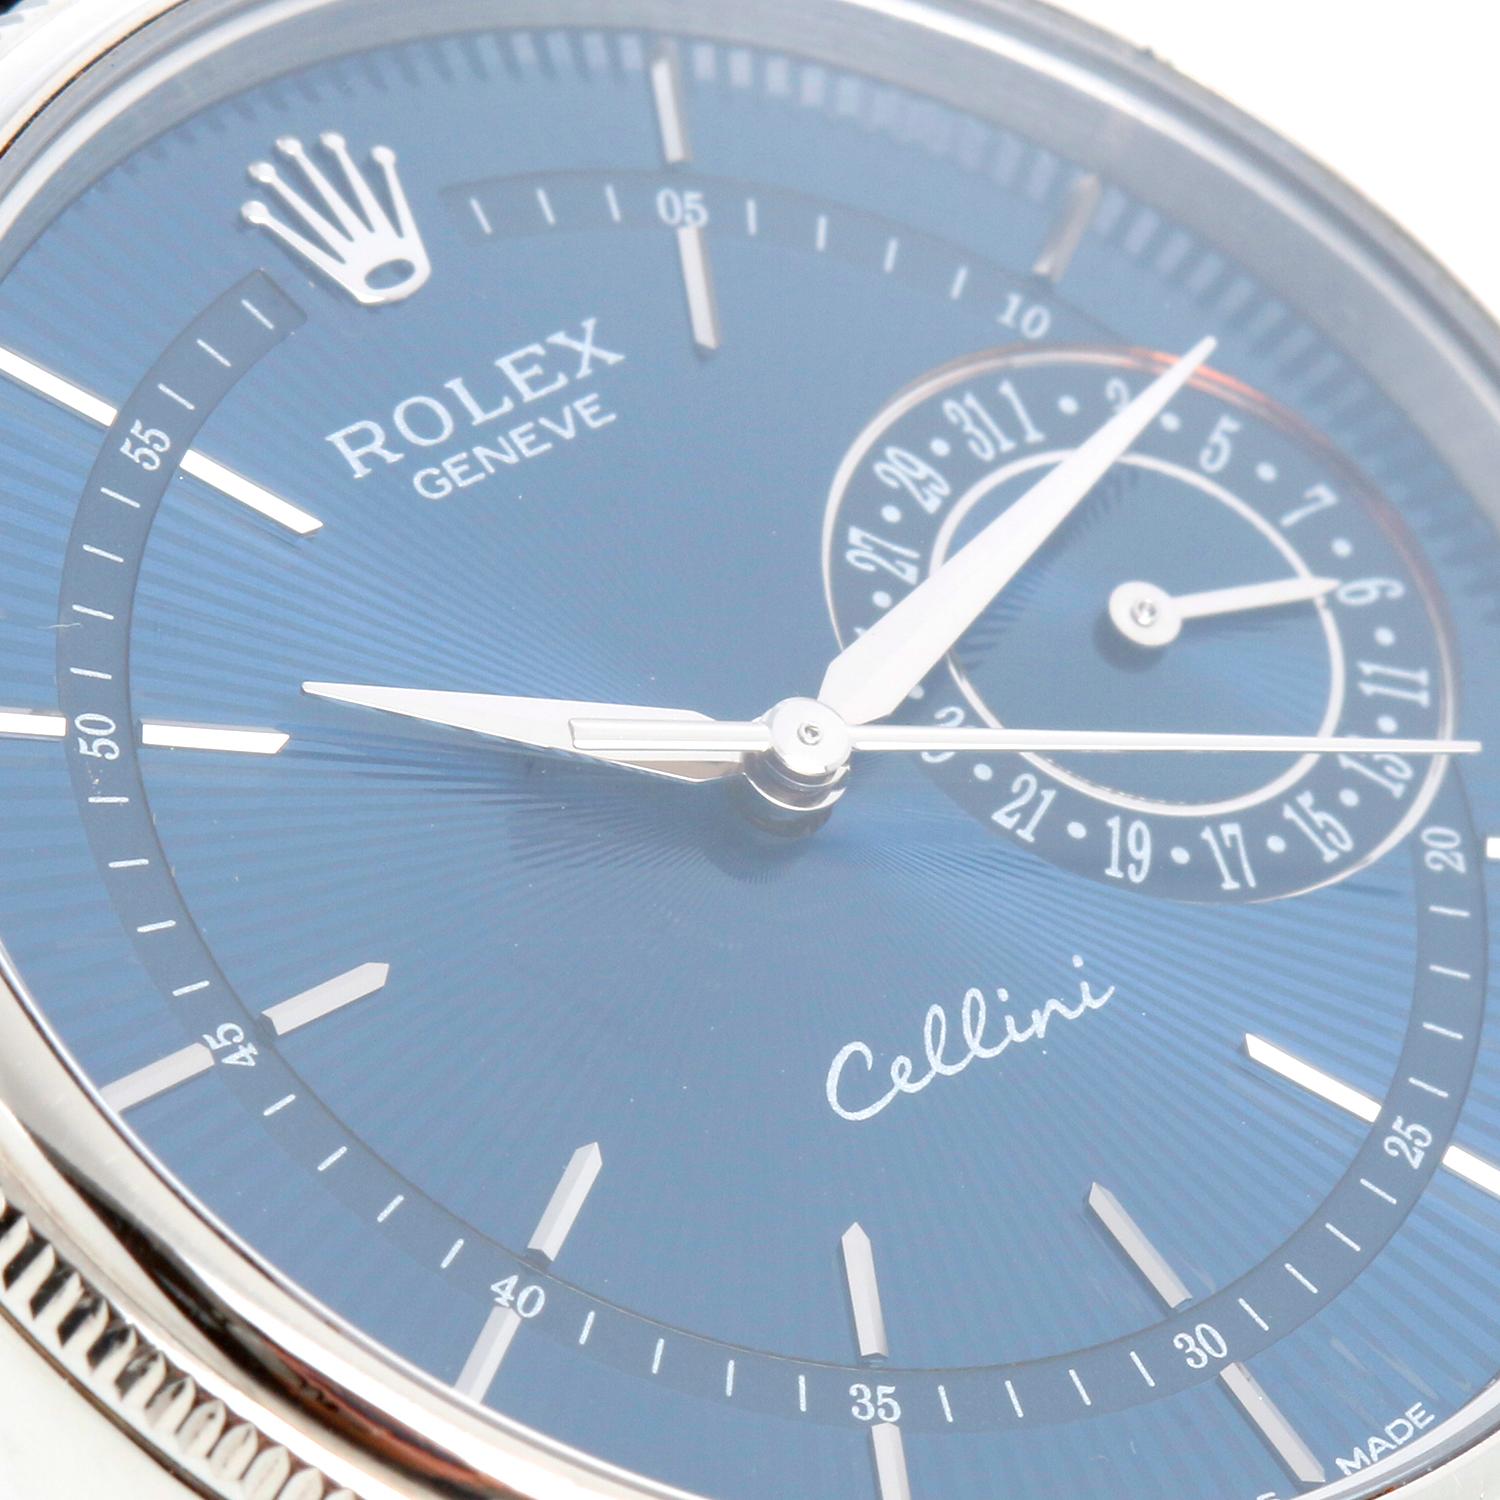 Rolex Cellini White Gold Mens Dress Watch Ref 50519 - Automatic. 18K White Gold ( 39 mm). Blue dial with stick hour markers; subdial at 3 o'clock . Black Leather Strap with Rolex buckle. Pre-owned with Rolex box .